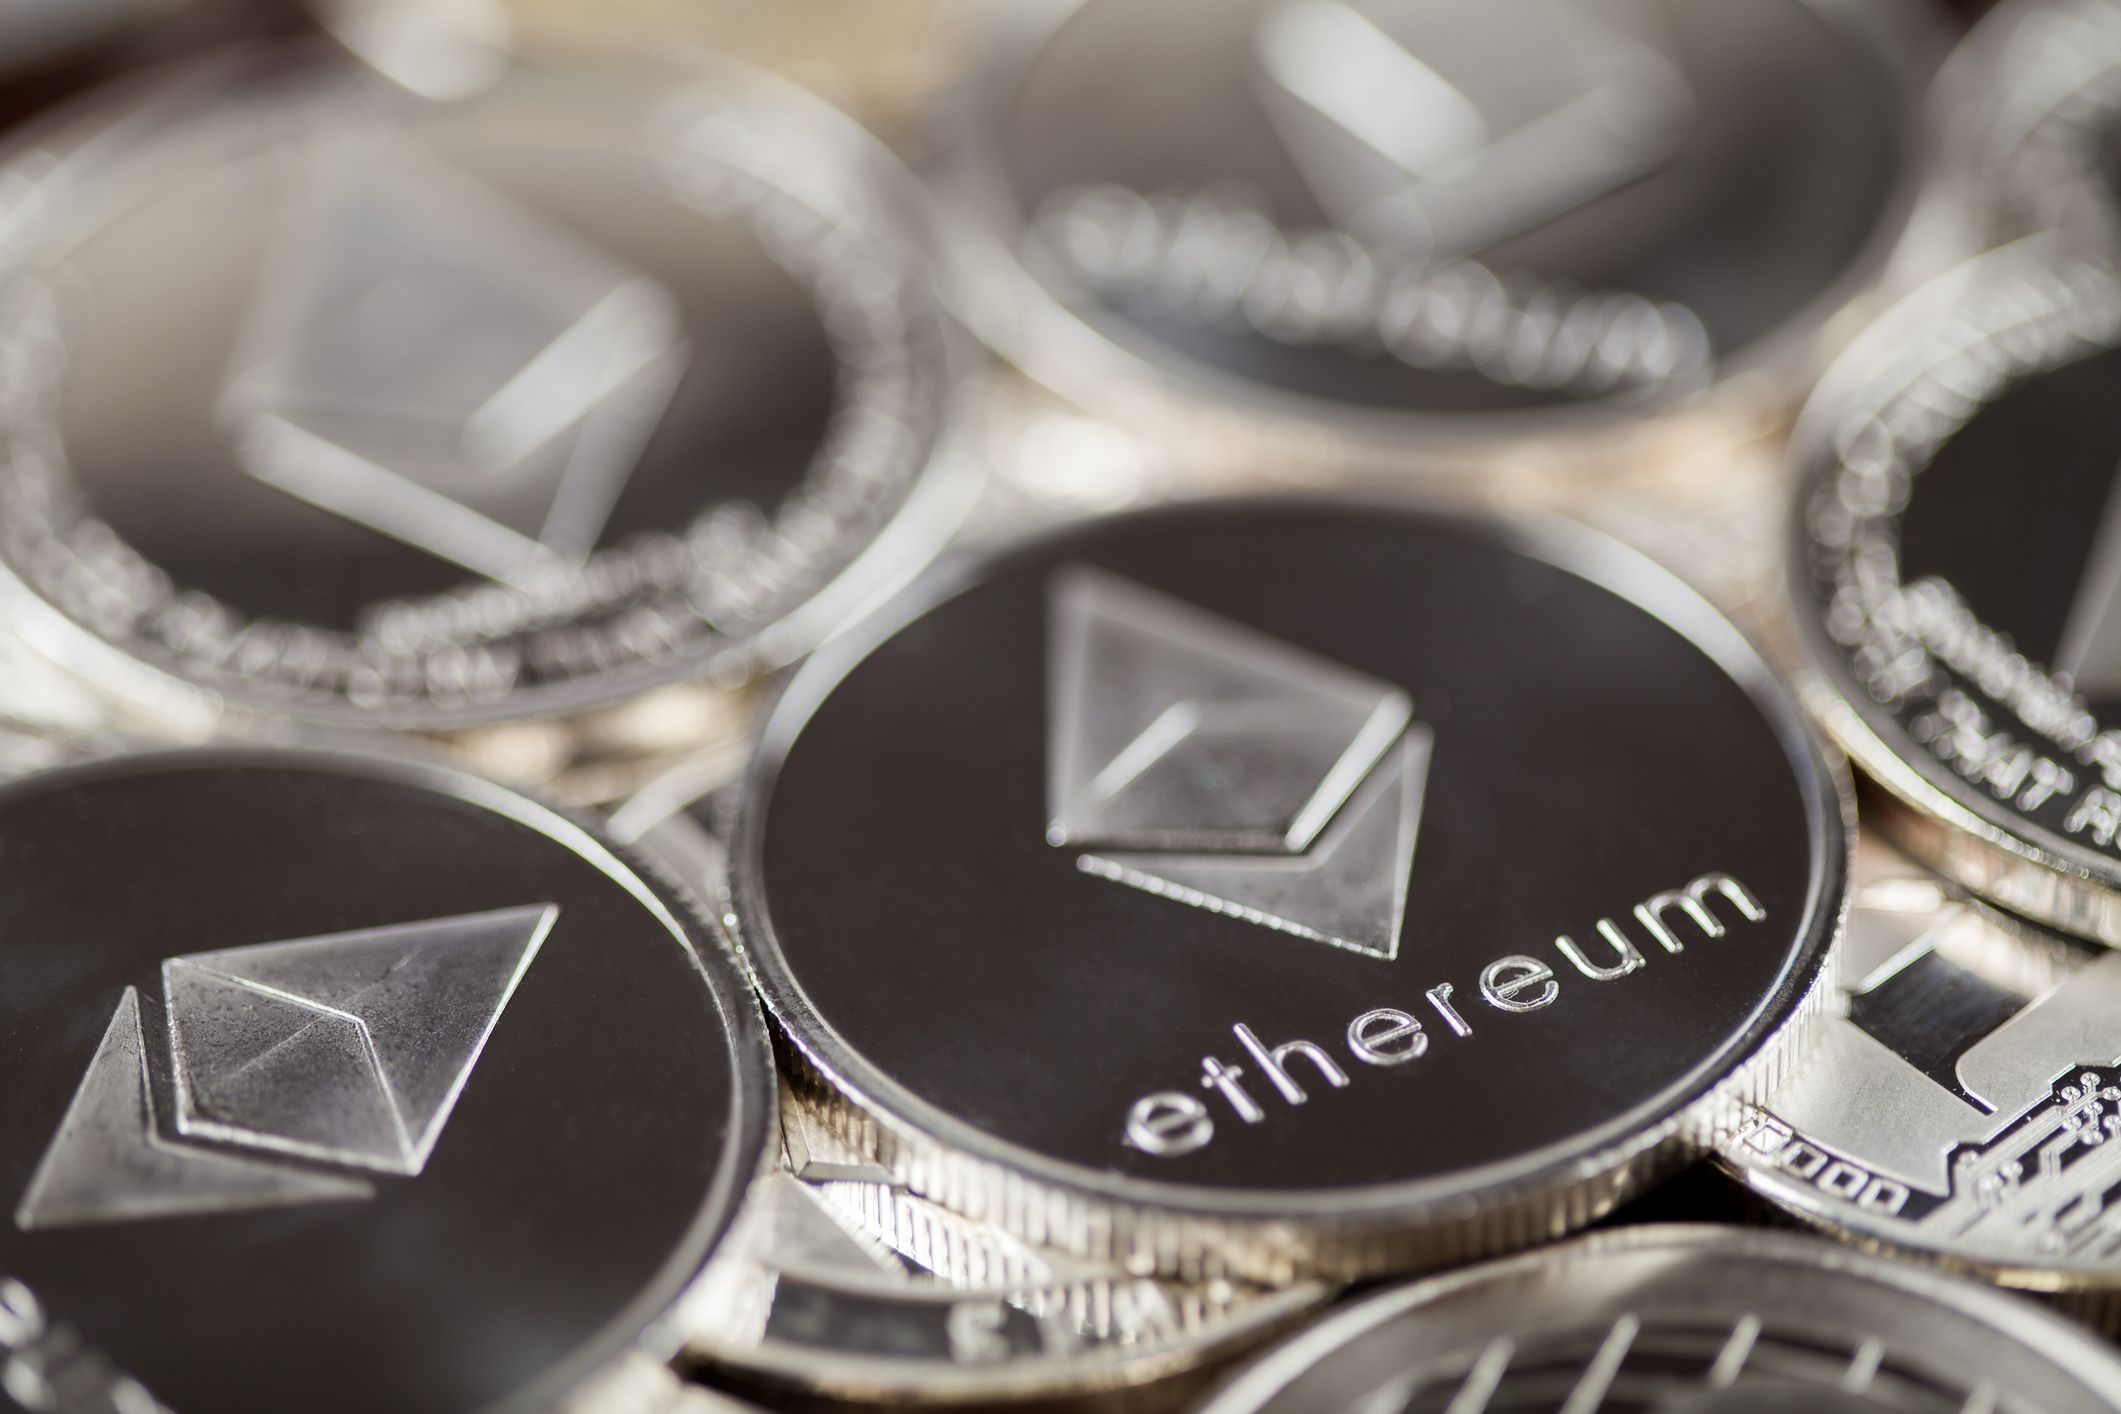 Ethereum mempool download grows 35% after Uniswap governance tokens are released